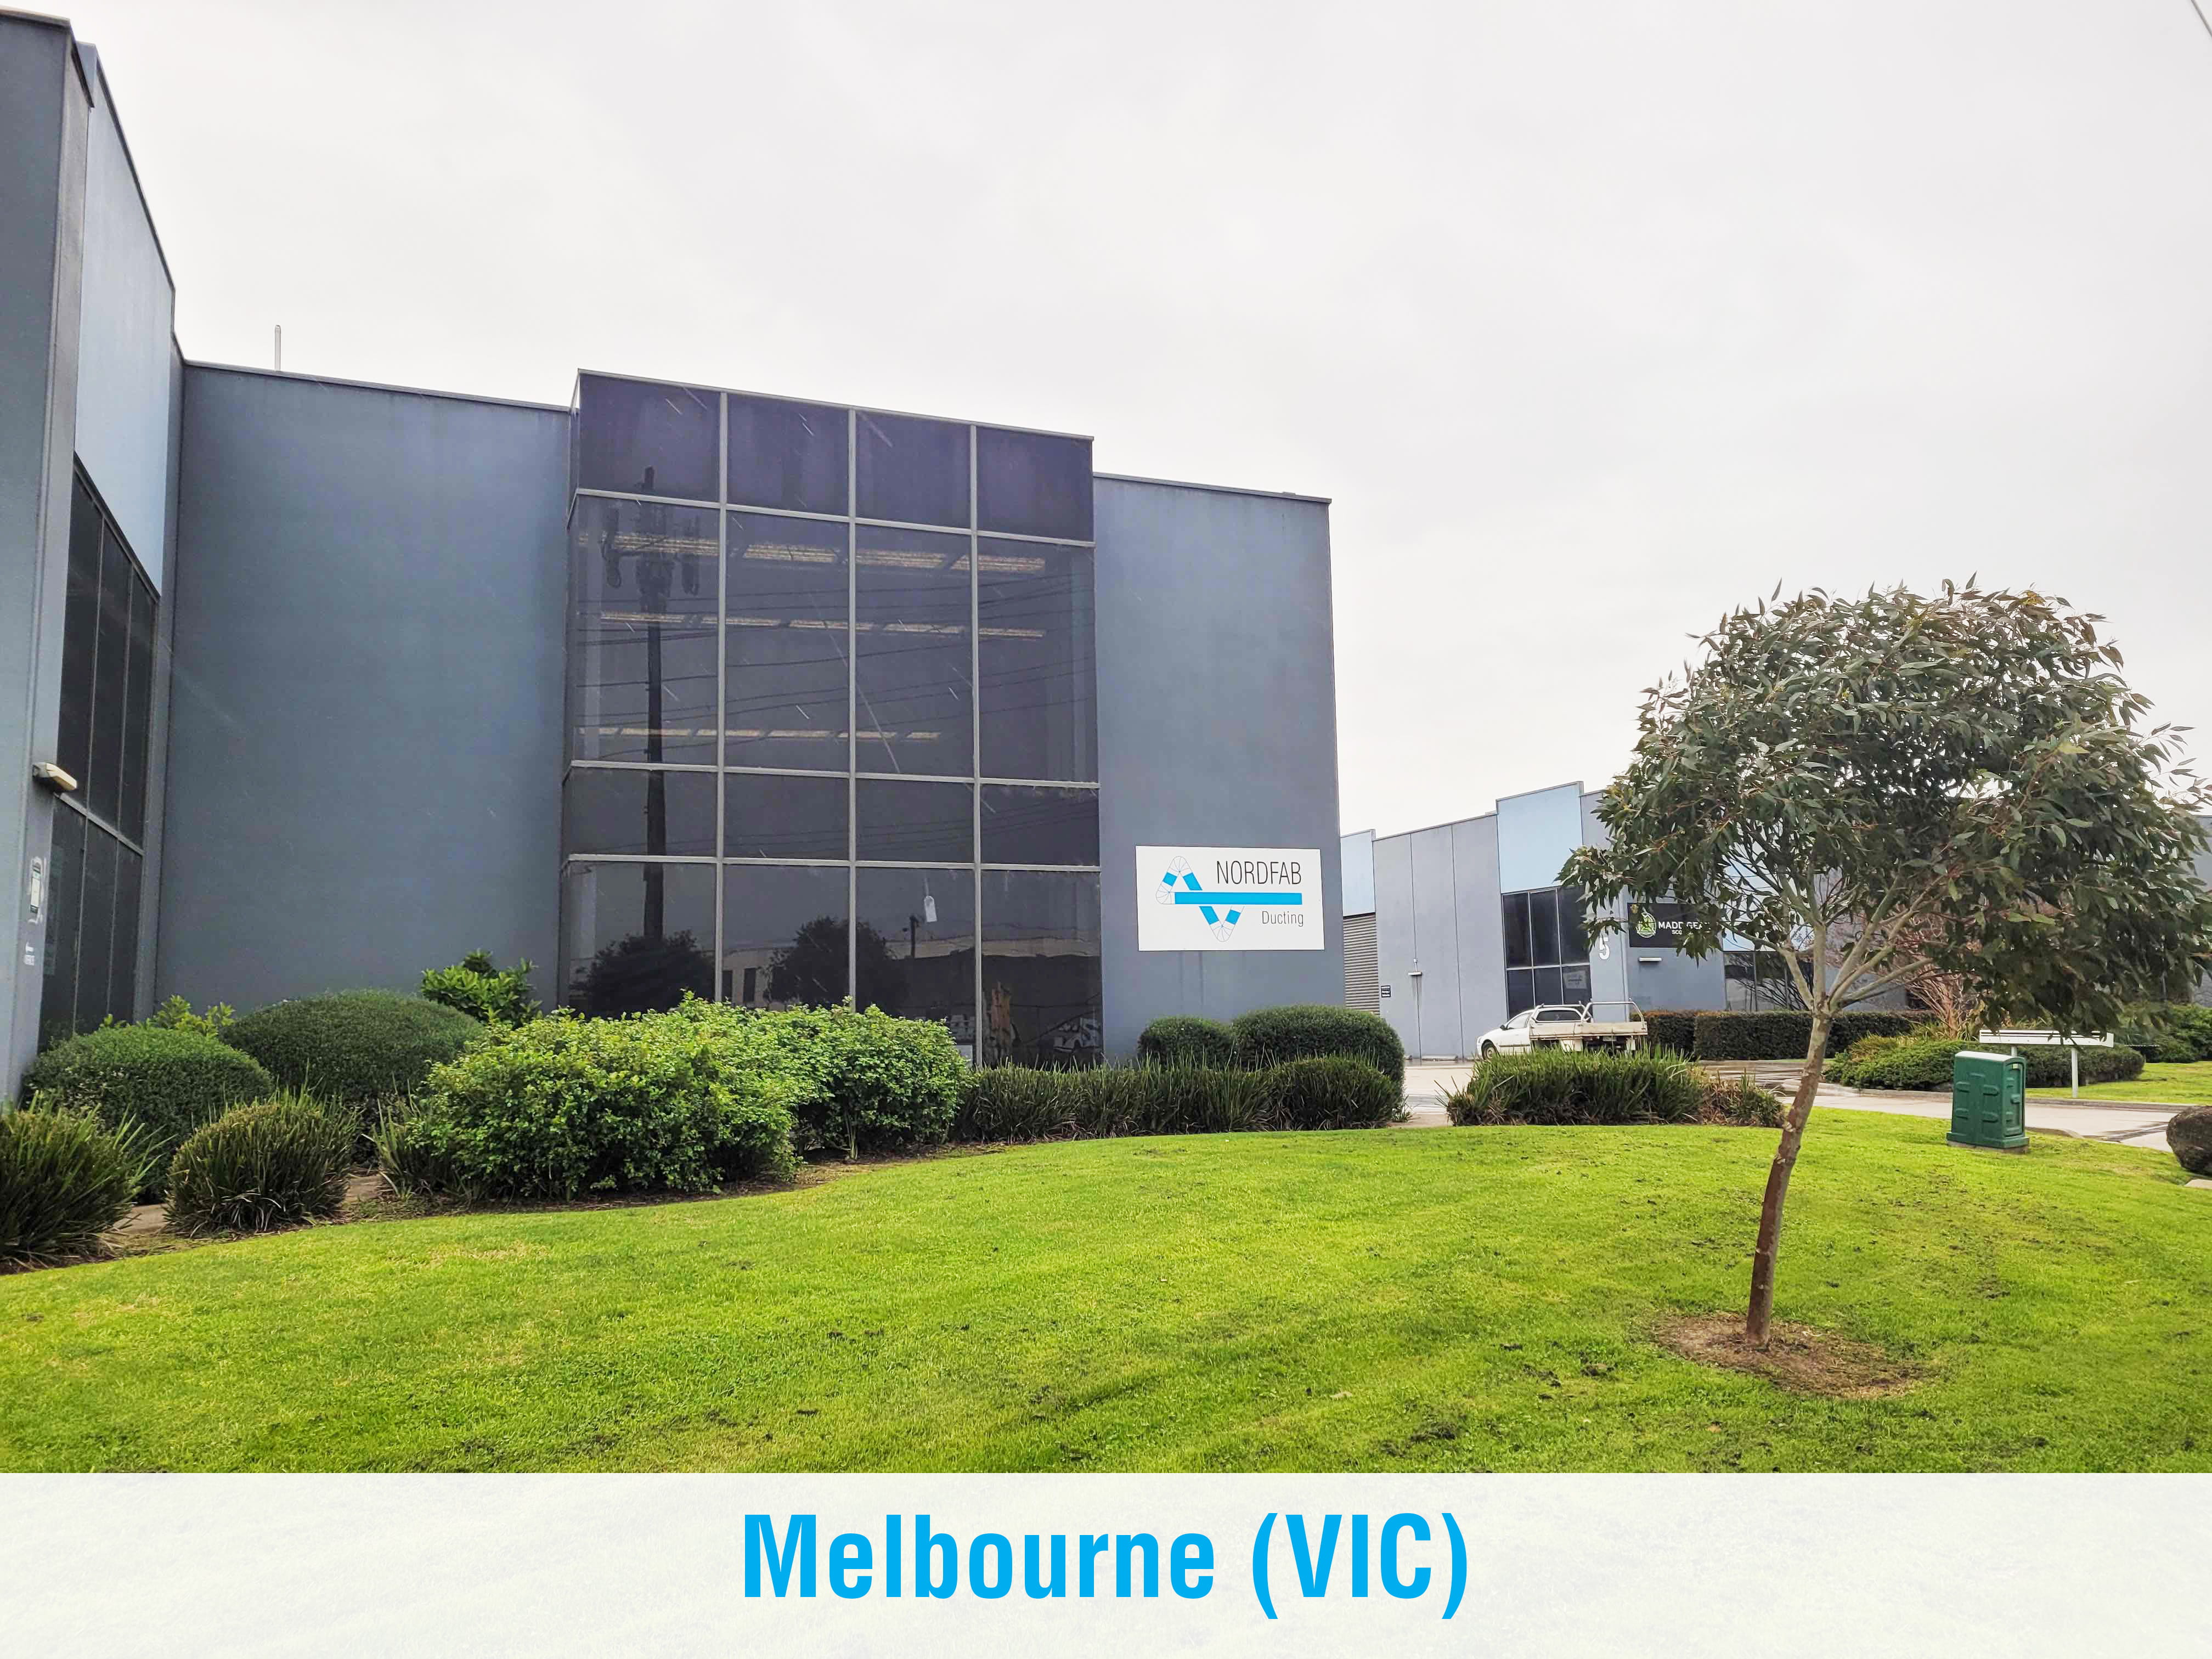 Nordfab Melbourne VIC office